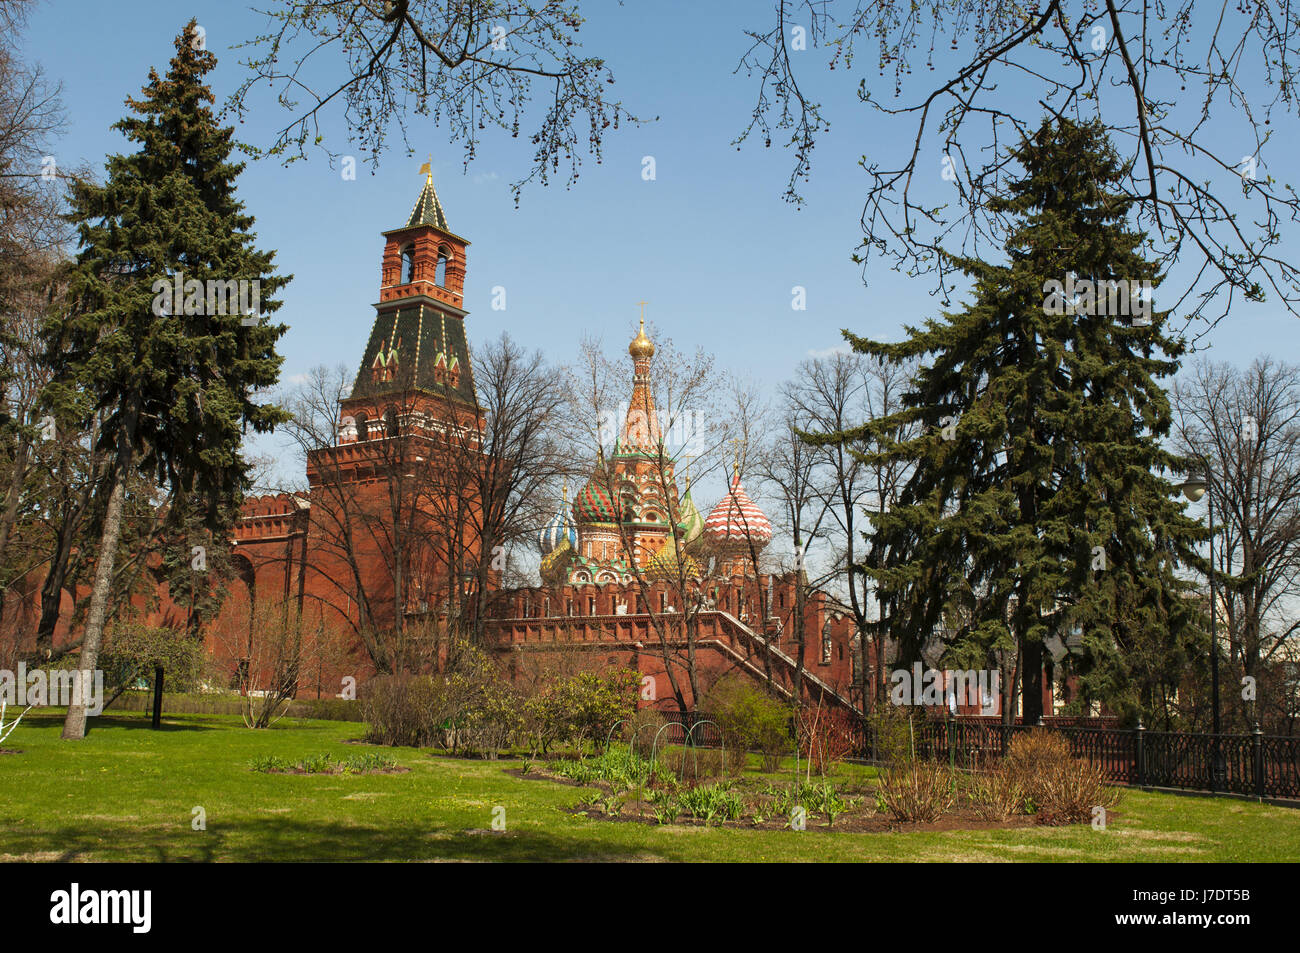 Moscow Kremlin, Russia: the Nabatnaya Tower (Alarm Bell Tower) and Saint Basil's Cathedral, the world famous orthodox church in the Red Square Stock Photo